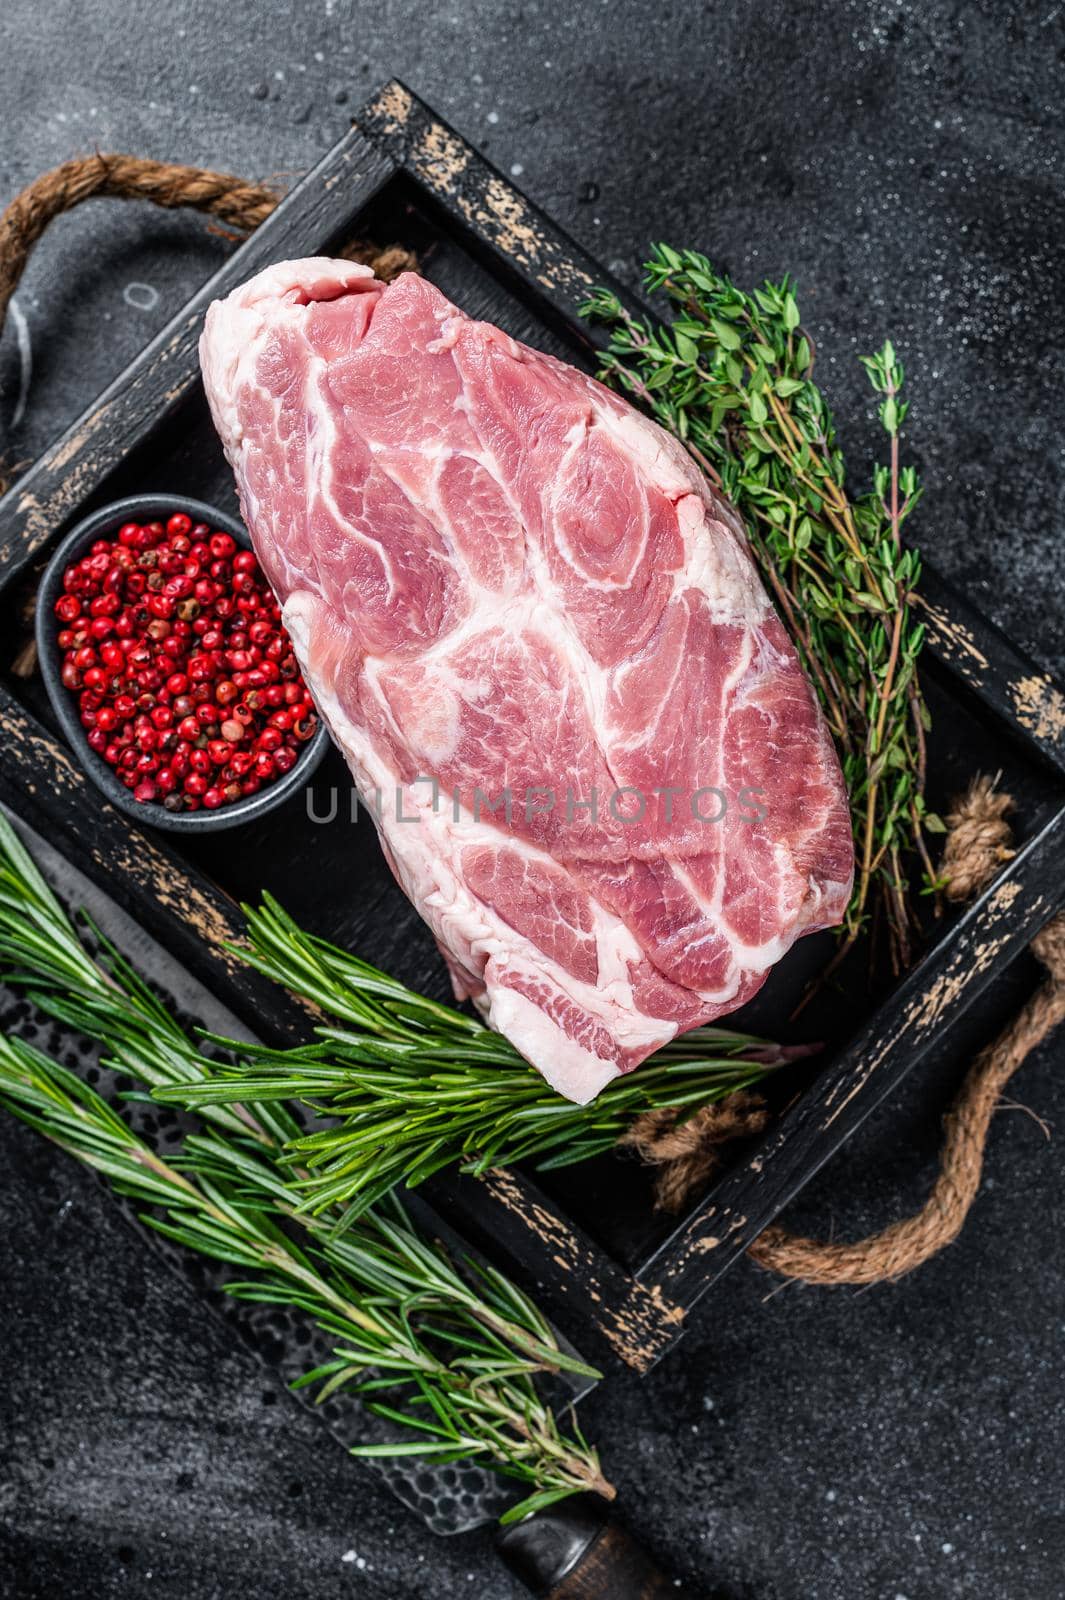 Raw pork neck meat piece for Chop steak in wooden tray with herbs. Black background. Top view.